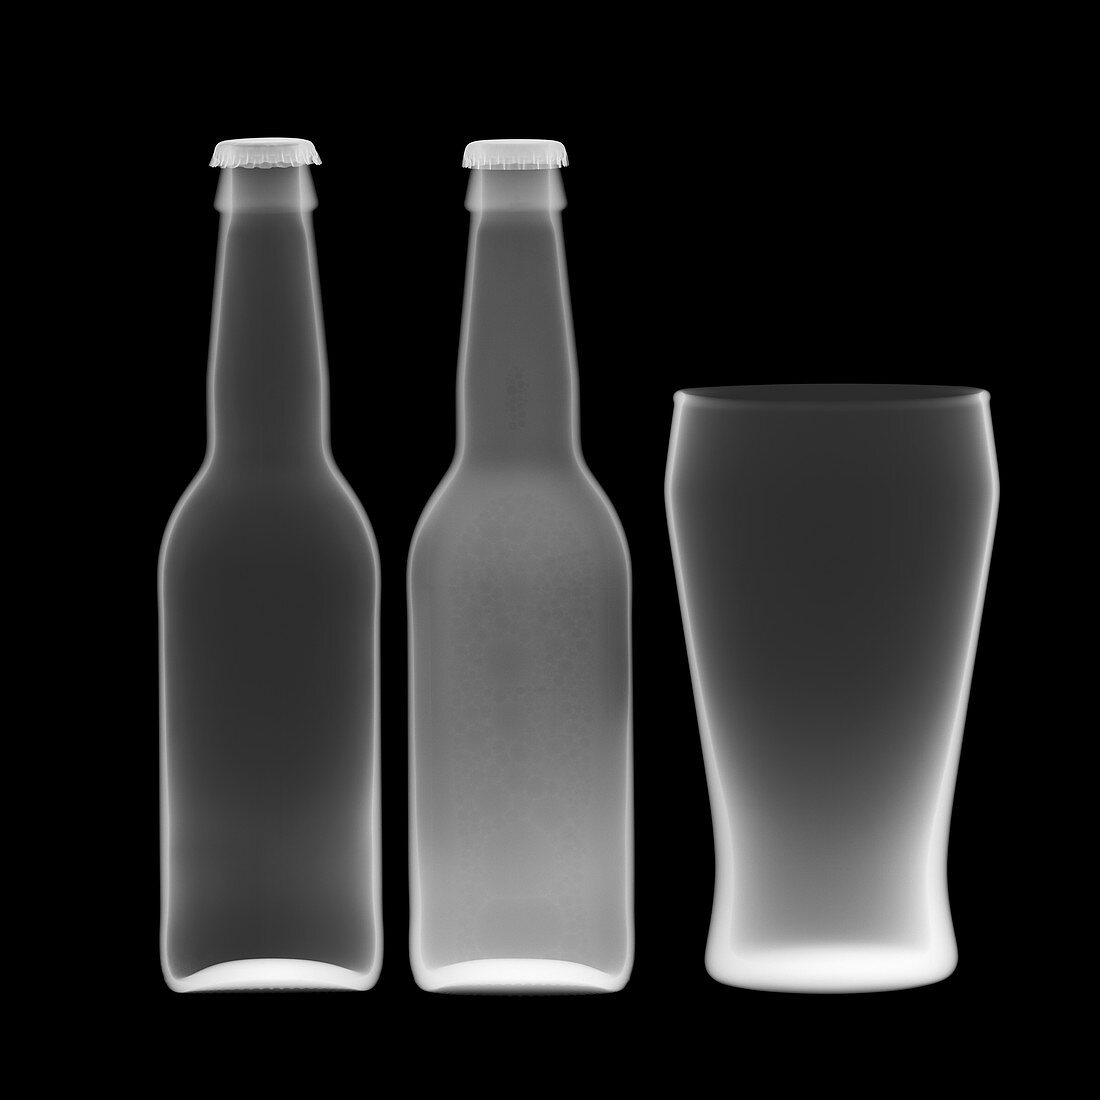 Beer bottles and drinking glass, X-ray